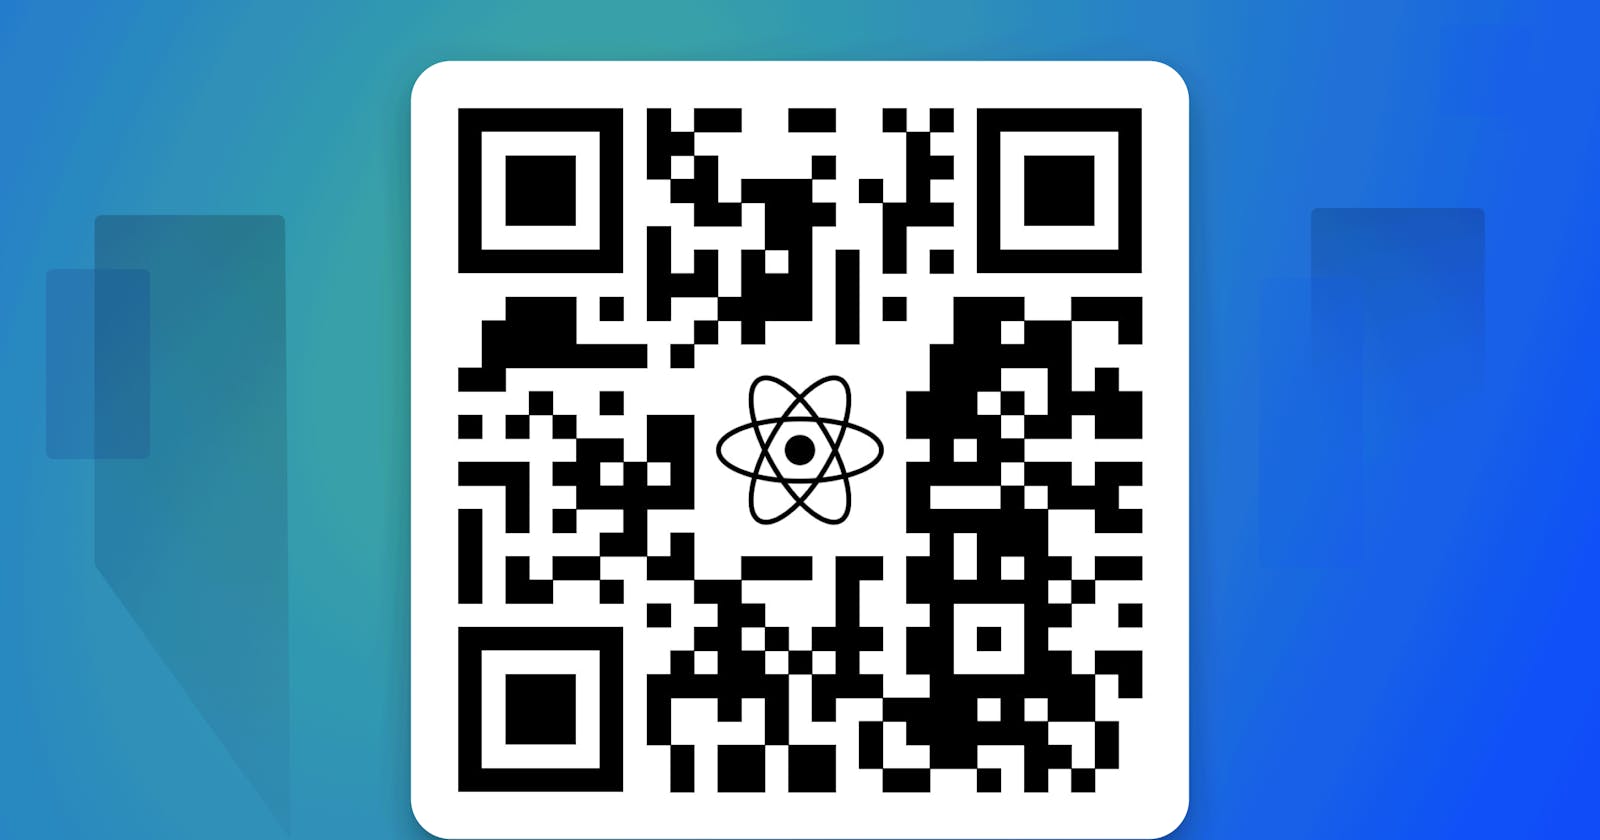 Creating QR Codes with React Native